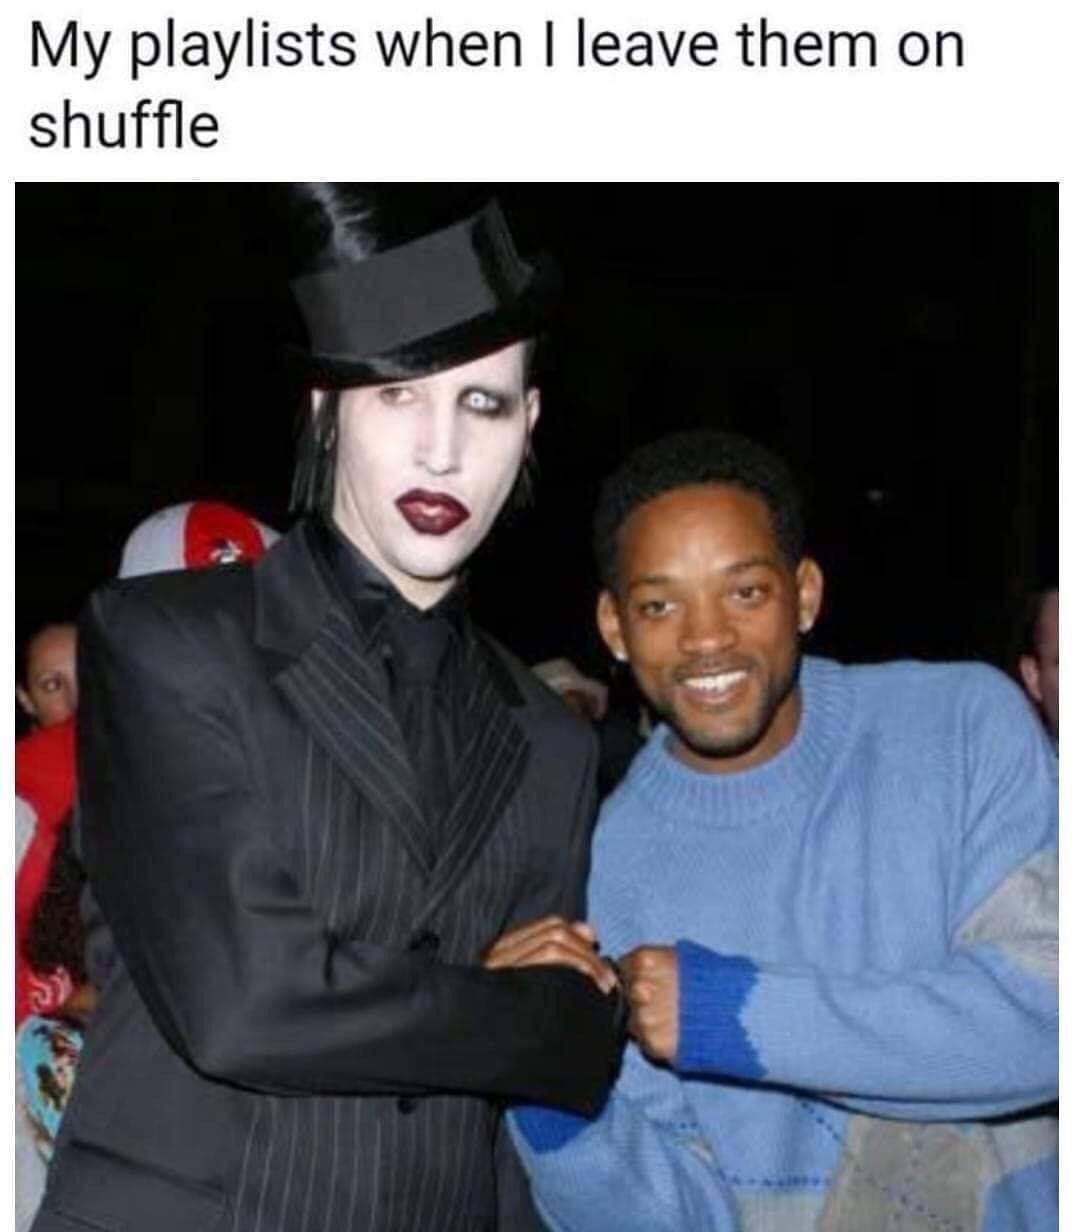 cool pic of will smith marilyn manson - My playlists when I leave them on shuffle